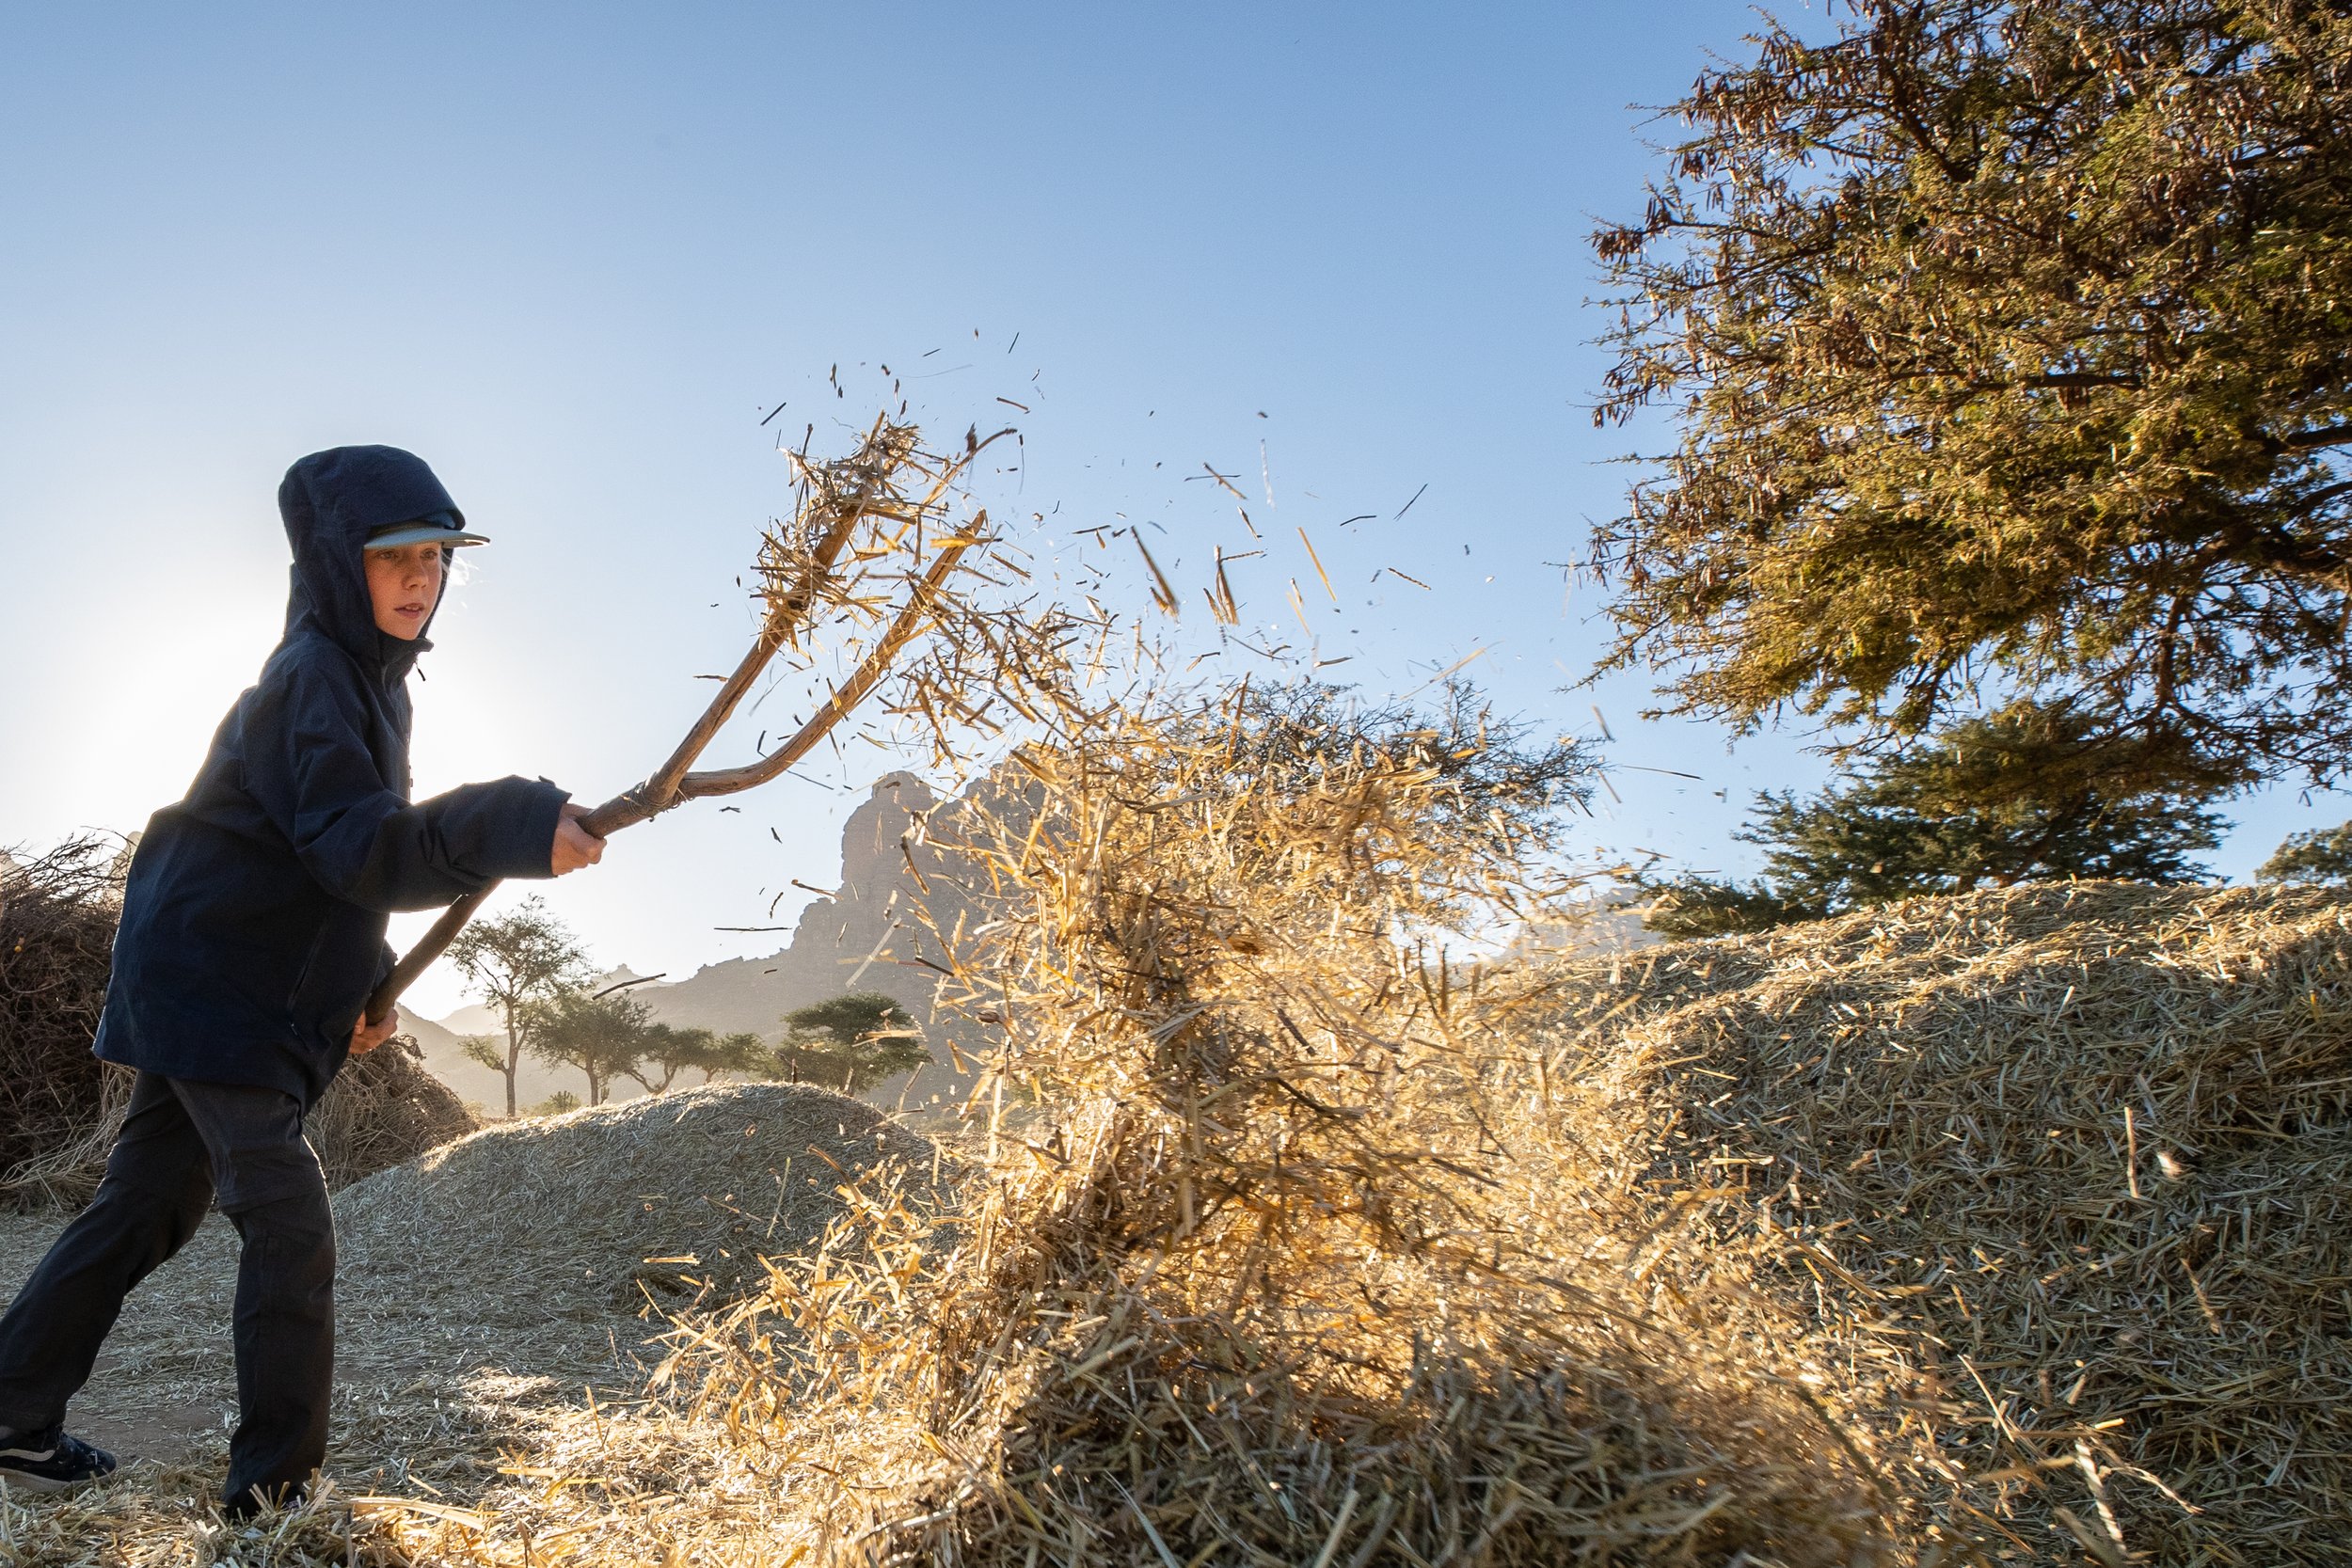   Adwaw, Ethiopia, 2019  - Learning to winnow teff, separating the seeds from the stalks, on a small family farm in the Tigray Region of Northern Ethiopia. 